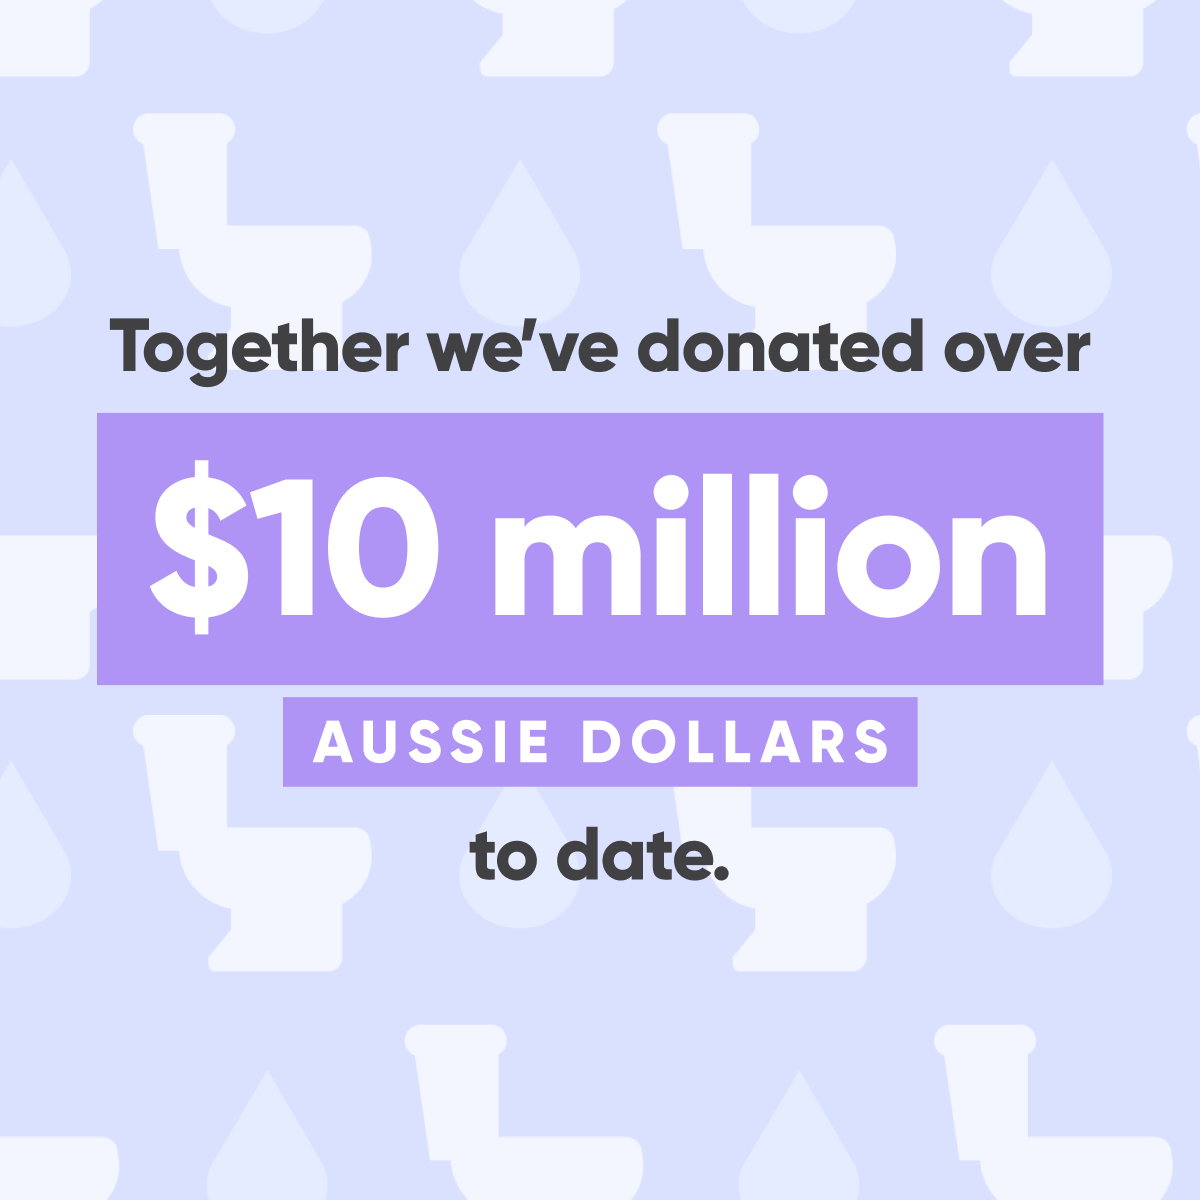 Together we've donated over $10 million Aussie Dollars to date.